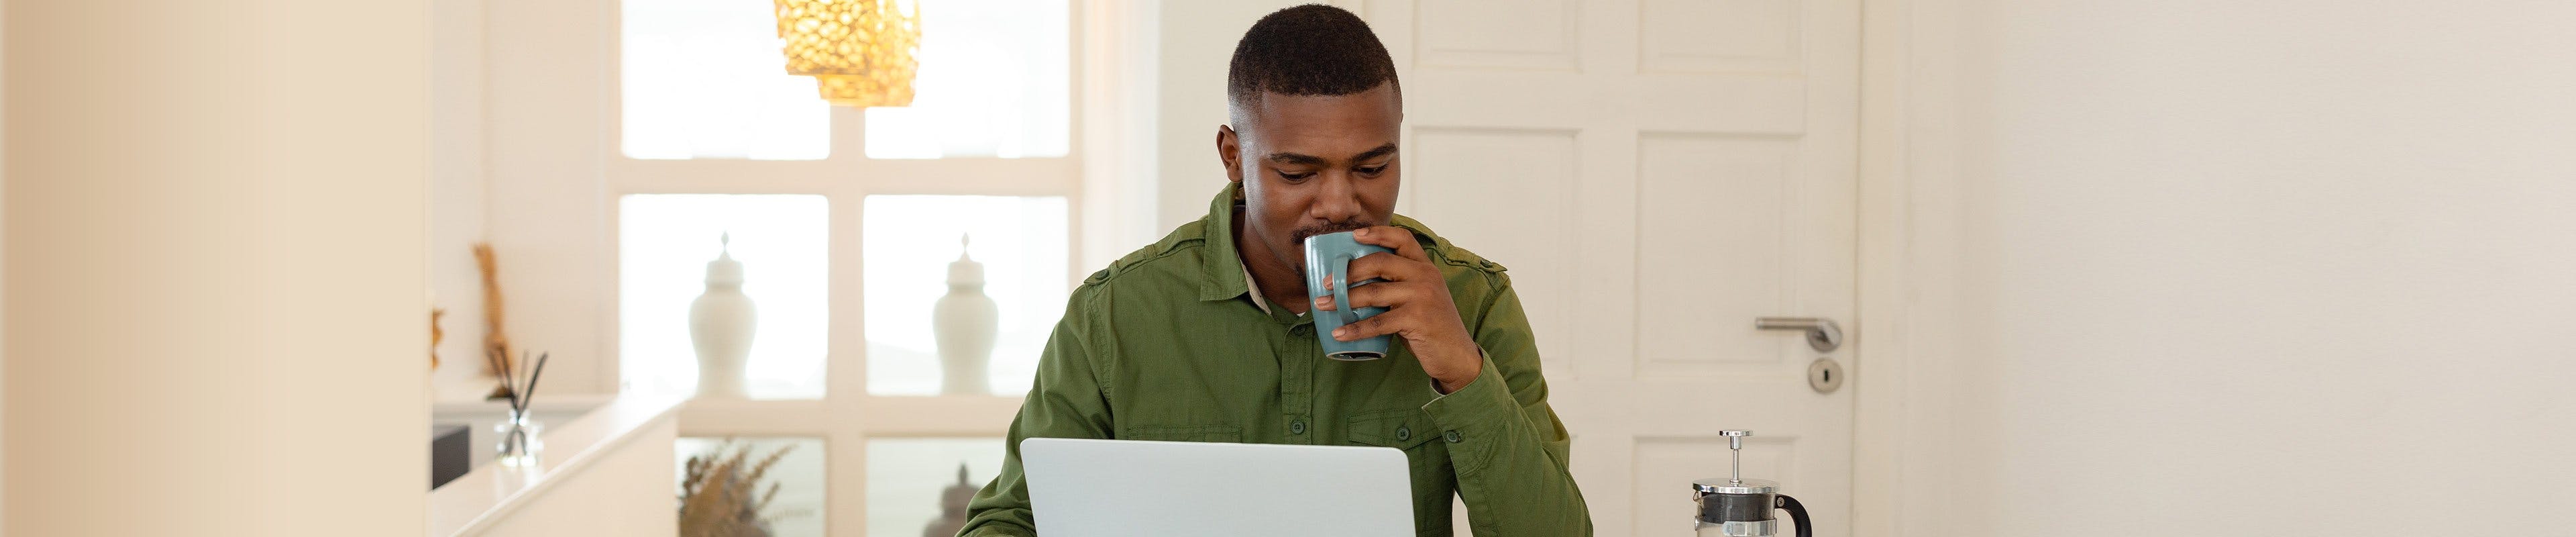 Image of a man browsing the internet and drinking coffee, looking at ways to save on groceries.